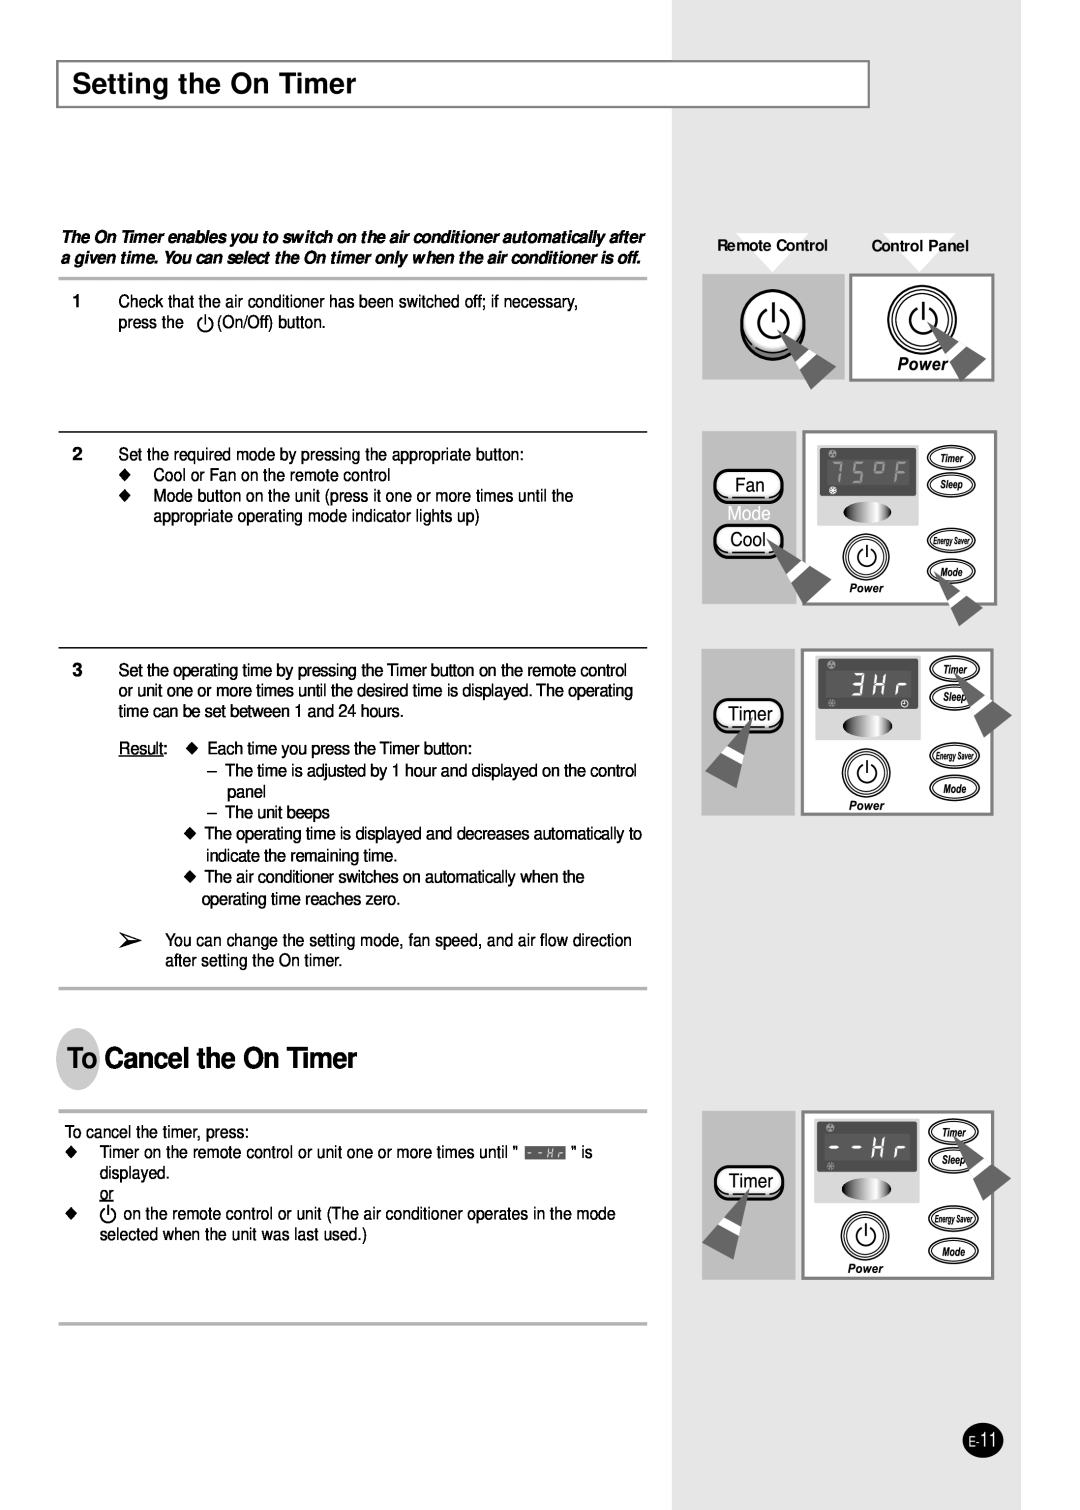 Samsung AW089AB, AW069AB, AW078AA, AW1880A, AW2480C, AW2490D manual Setting the On Timer, To Cancel the On Timer, Remote Control 